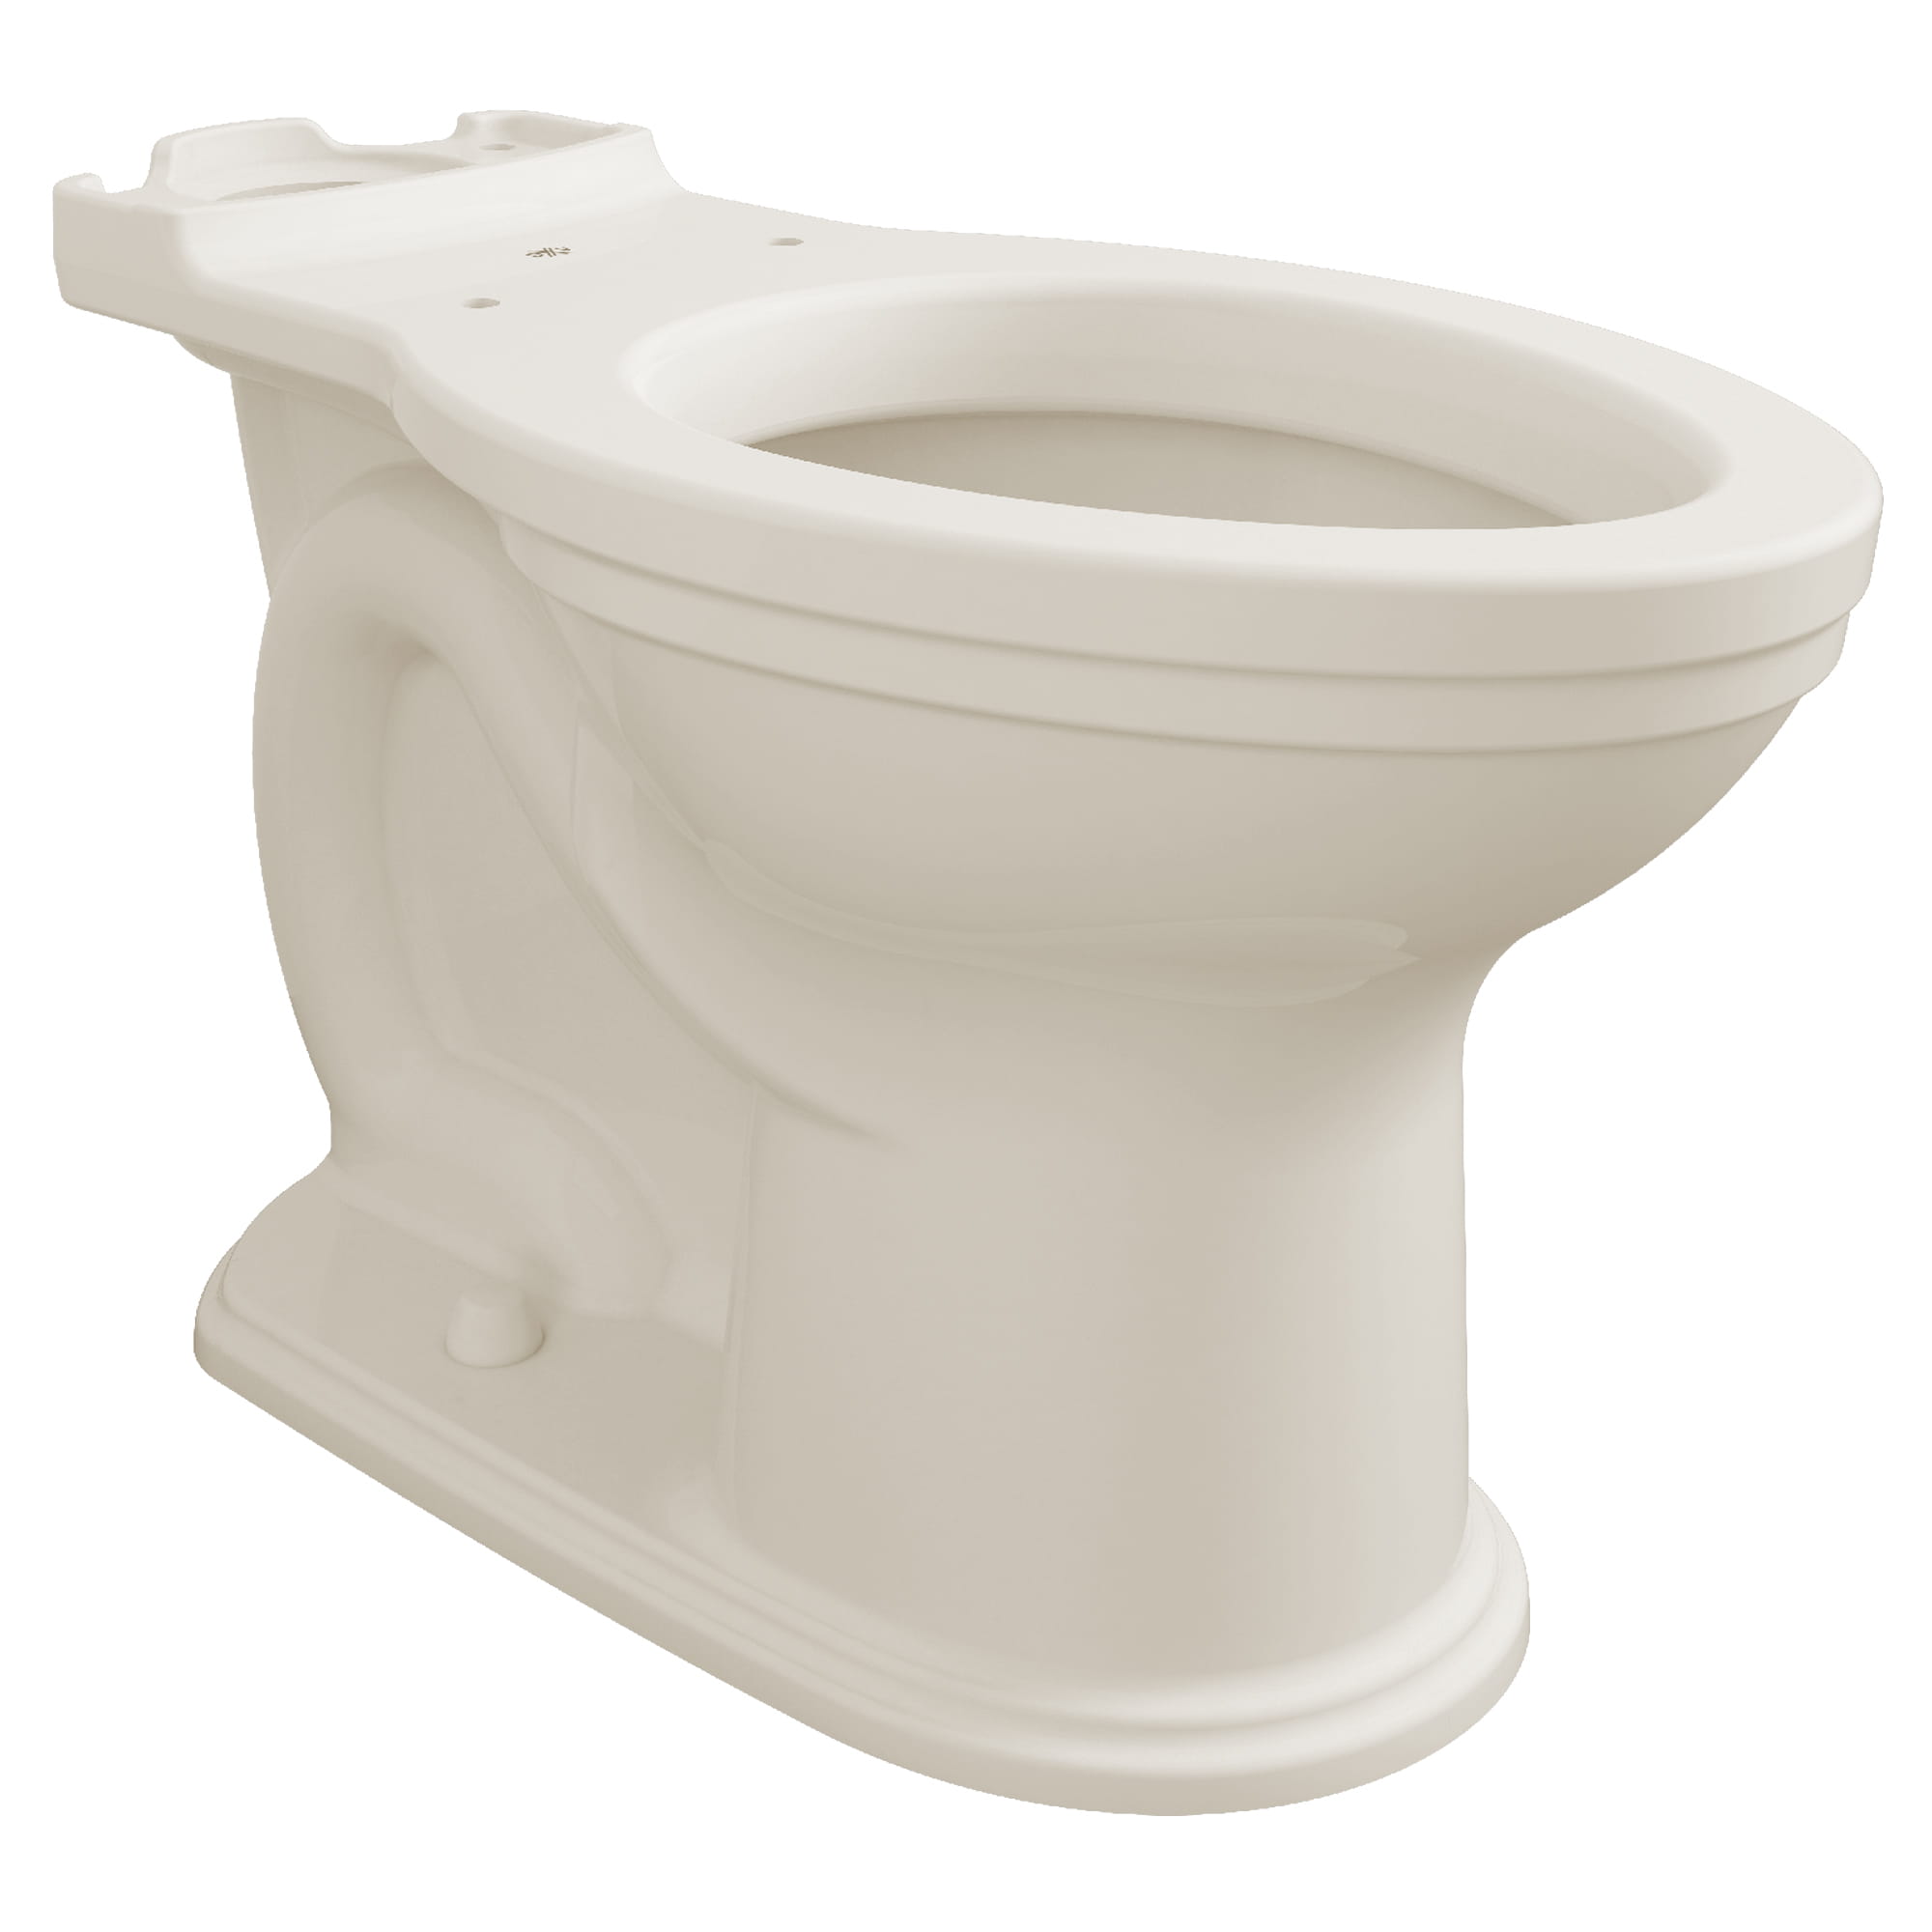 Saint George Chair Height Elongated Toilet Bowl with Seat